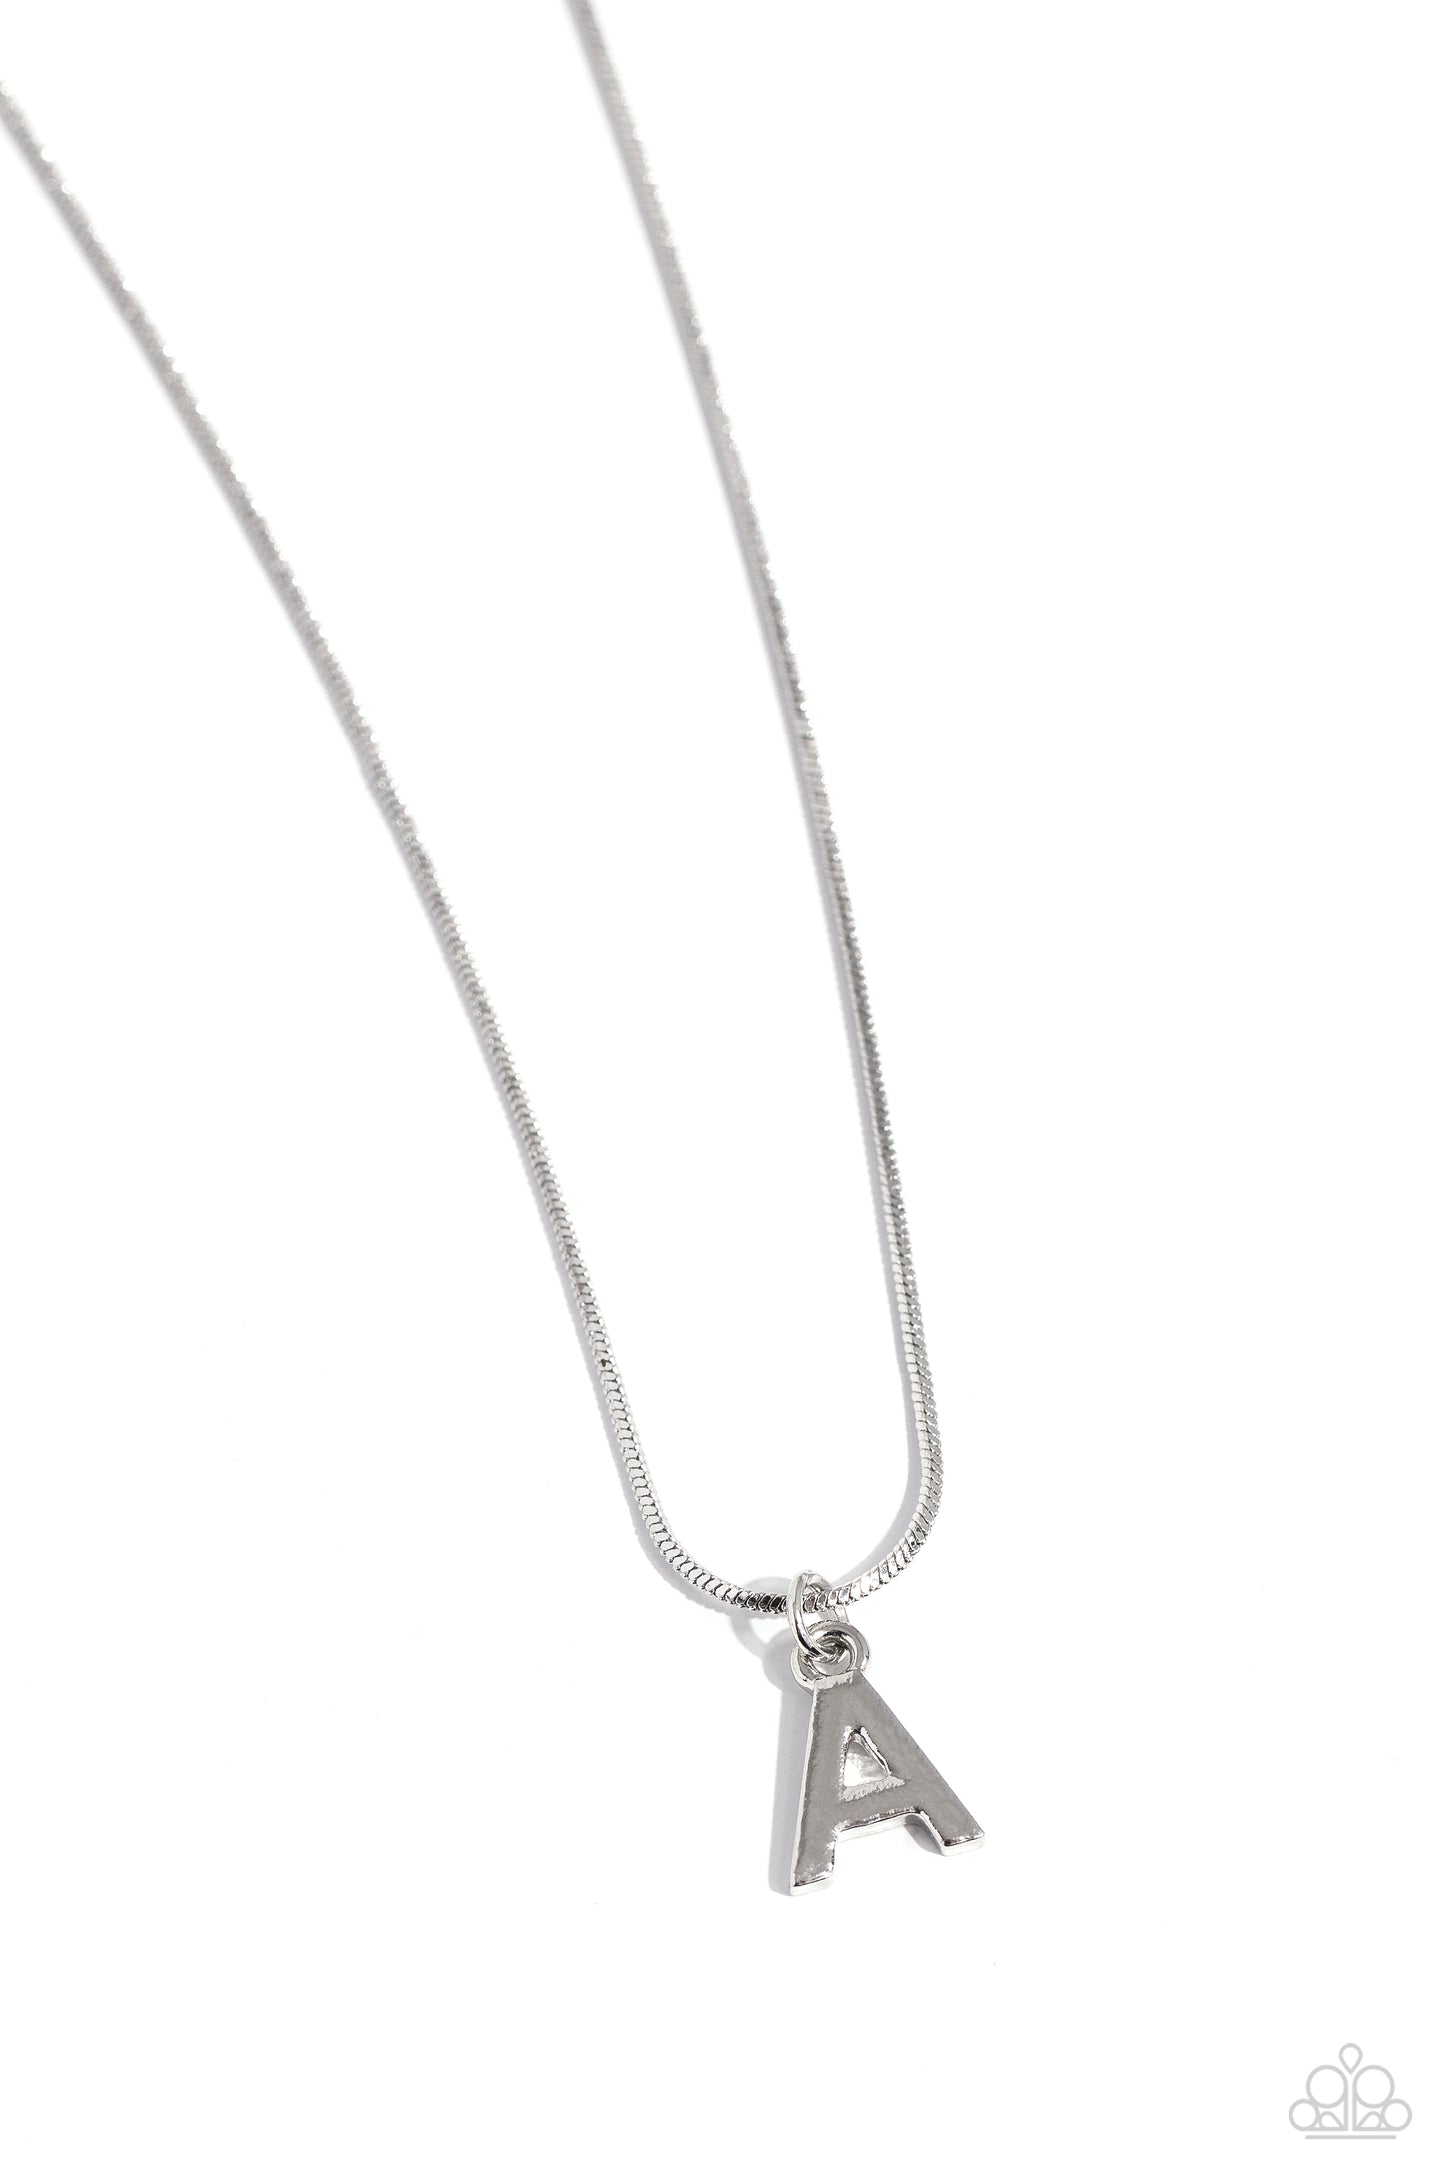 Seize the Initial Paparazzi Accessories -Necklaces with Earrings - Silver - A